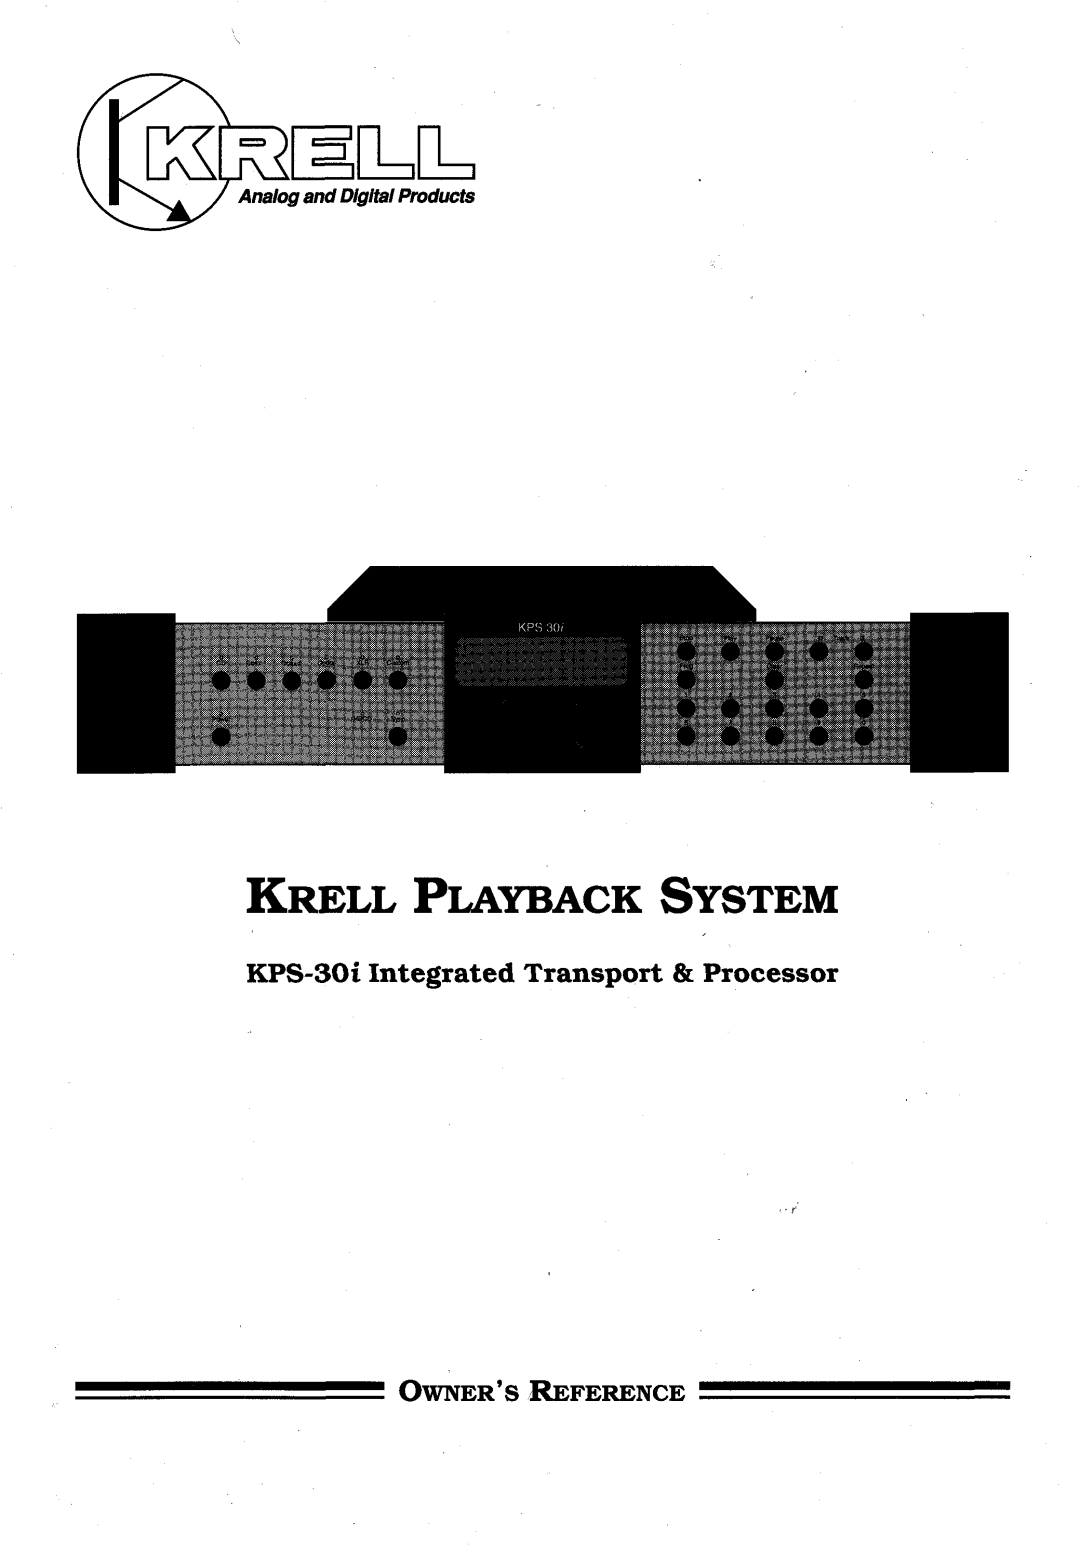 Krell Industries manual KPS-30iIntegrated Transport & Processor, Krell Playback System, ~g and, Digital, Products 